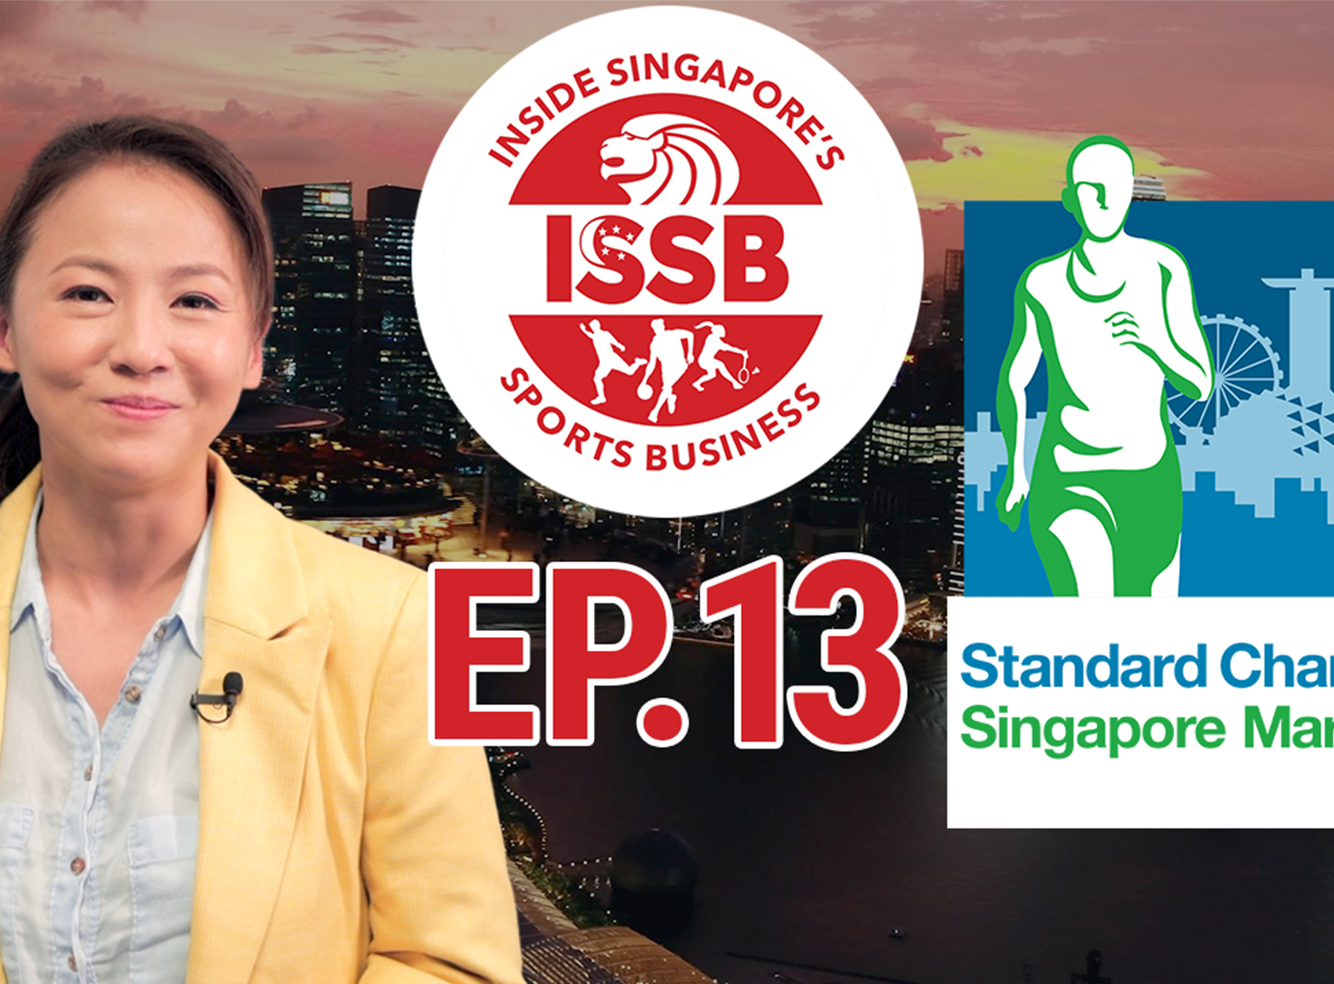 Ep 13 - Sports Events - Operations of Mass Participation Events (SCSM Edition)